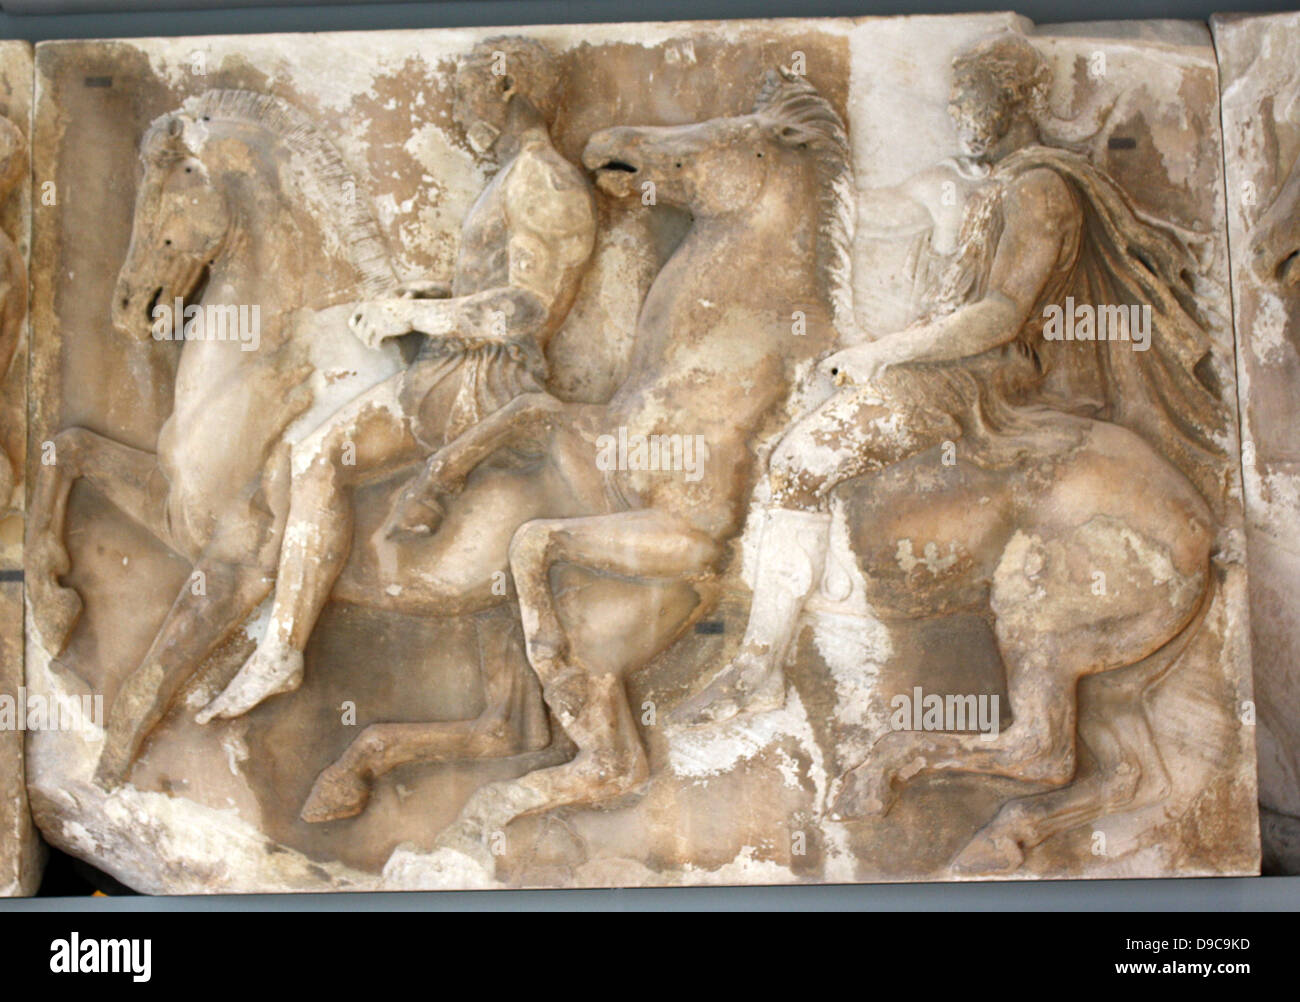 Section of the Parthenon frieze is the low relief, Pentelic marble sculpture created to adorn the upper part of the Parthenon’s naos. It was sculpted between ca. 443 and 438 BC, under the direction of Phidias. Acropolis Museum, Athens, Greece. Stock Photo